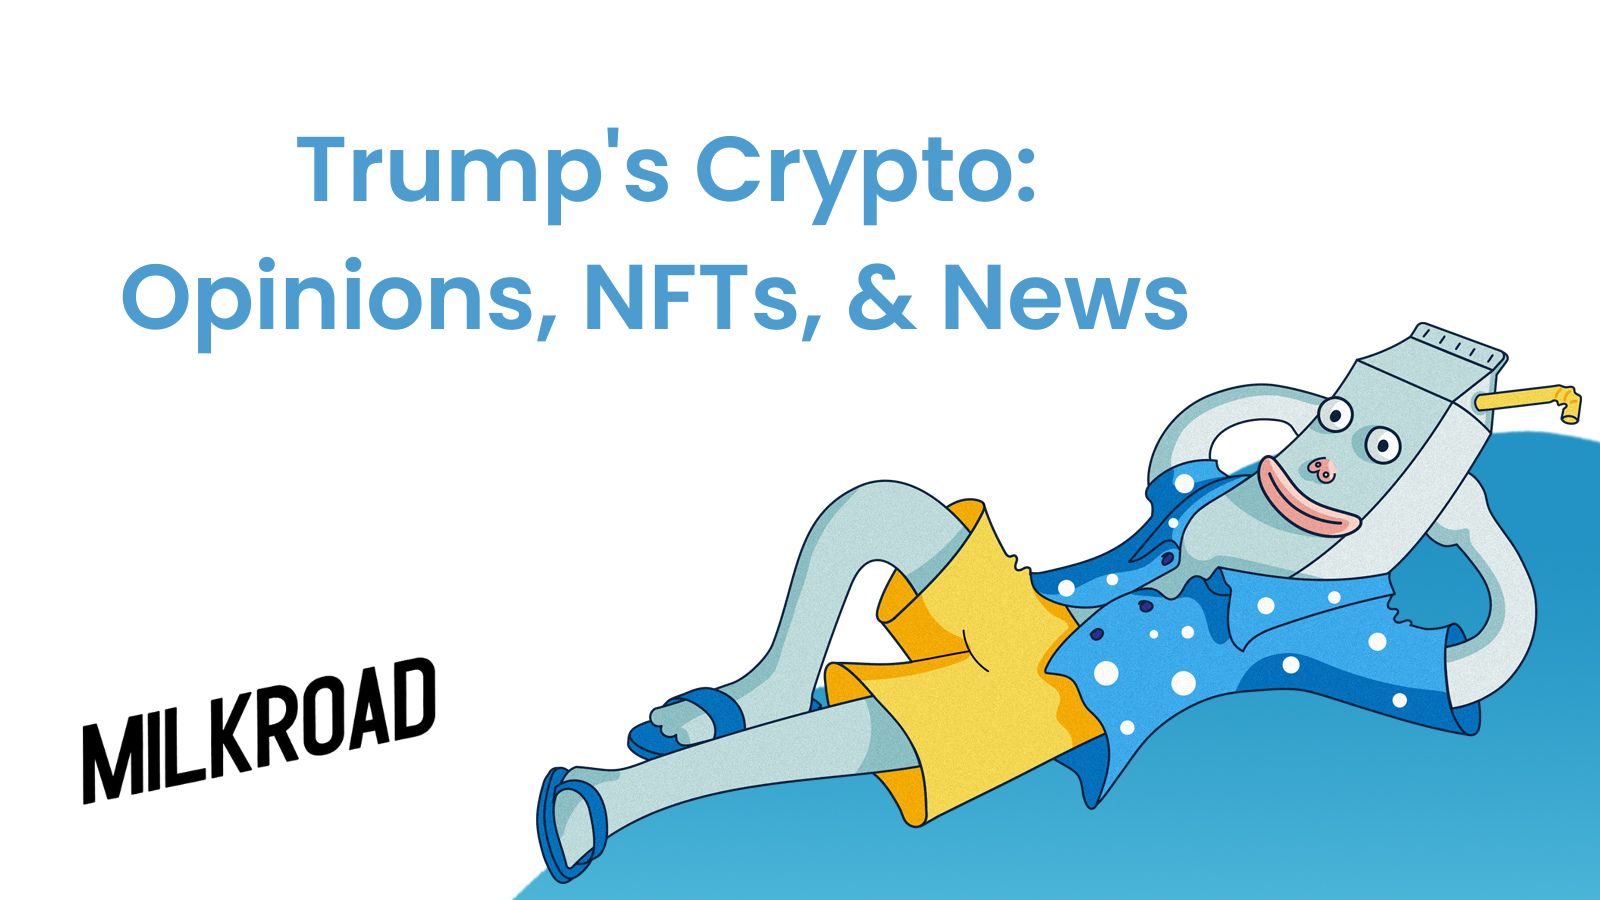 Trump's Crypto Opinions, NFTs, & News